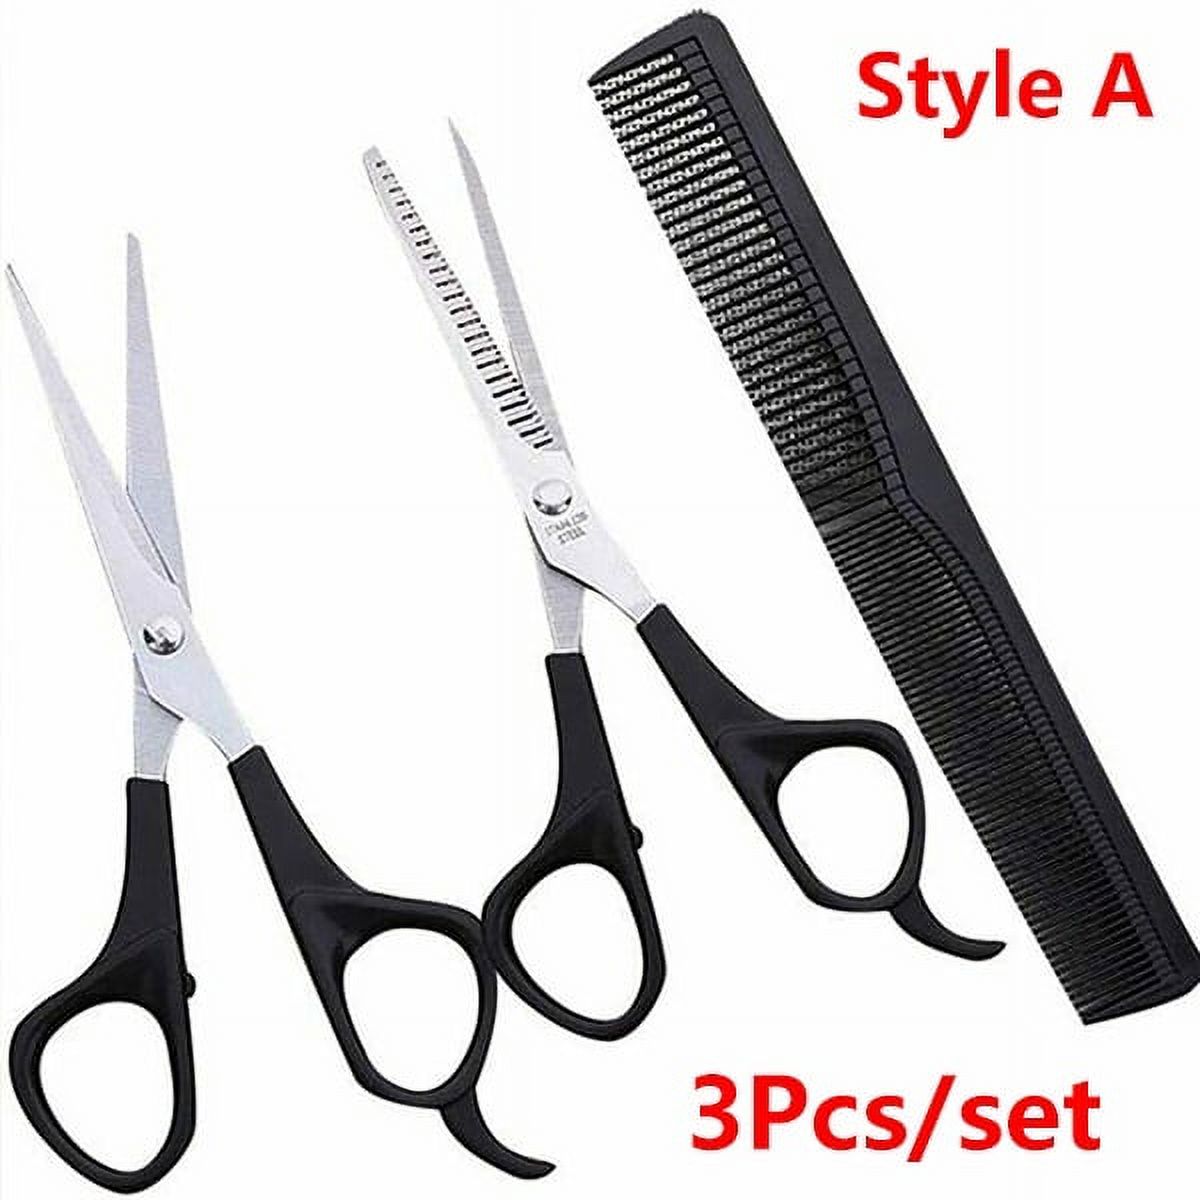 Willstar 3/9pcs Hair Cutting Scissors Set Professional Stainless Steel Barber Thinning Scissors for Barber Salon and Home - image 2 of 16